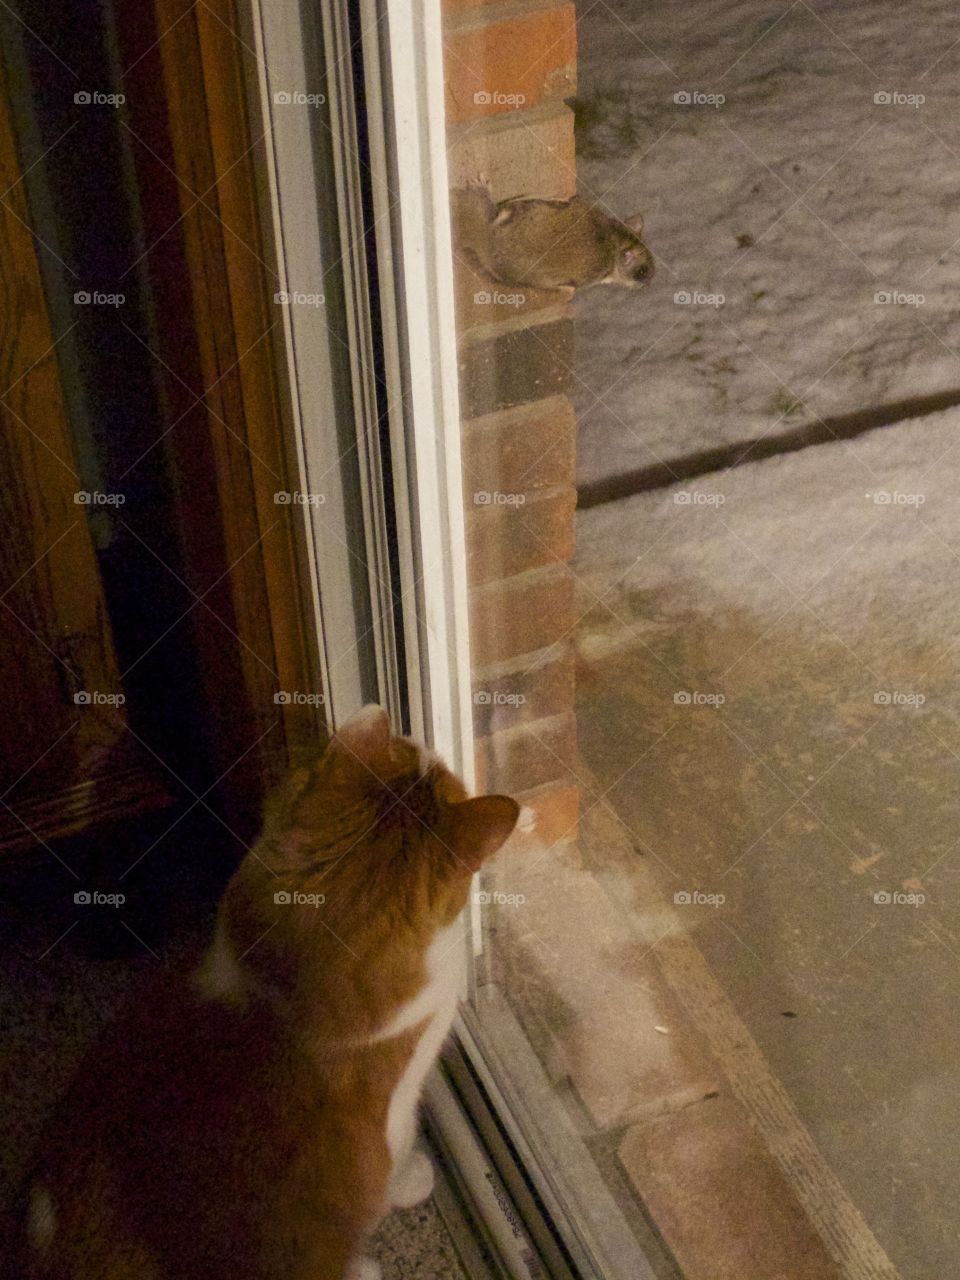 Gus and the Flying Squirrel . It was snowing and Gus and a flying squirrel met each other through the glass on the back door.